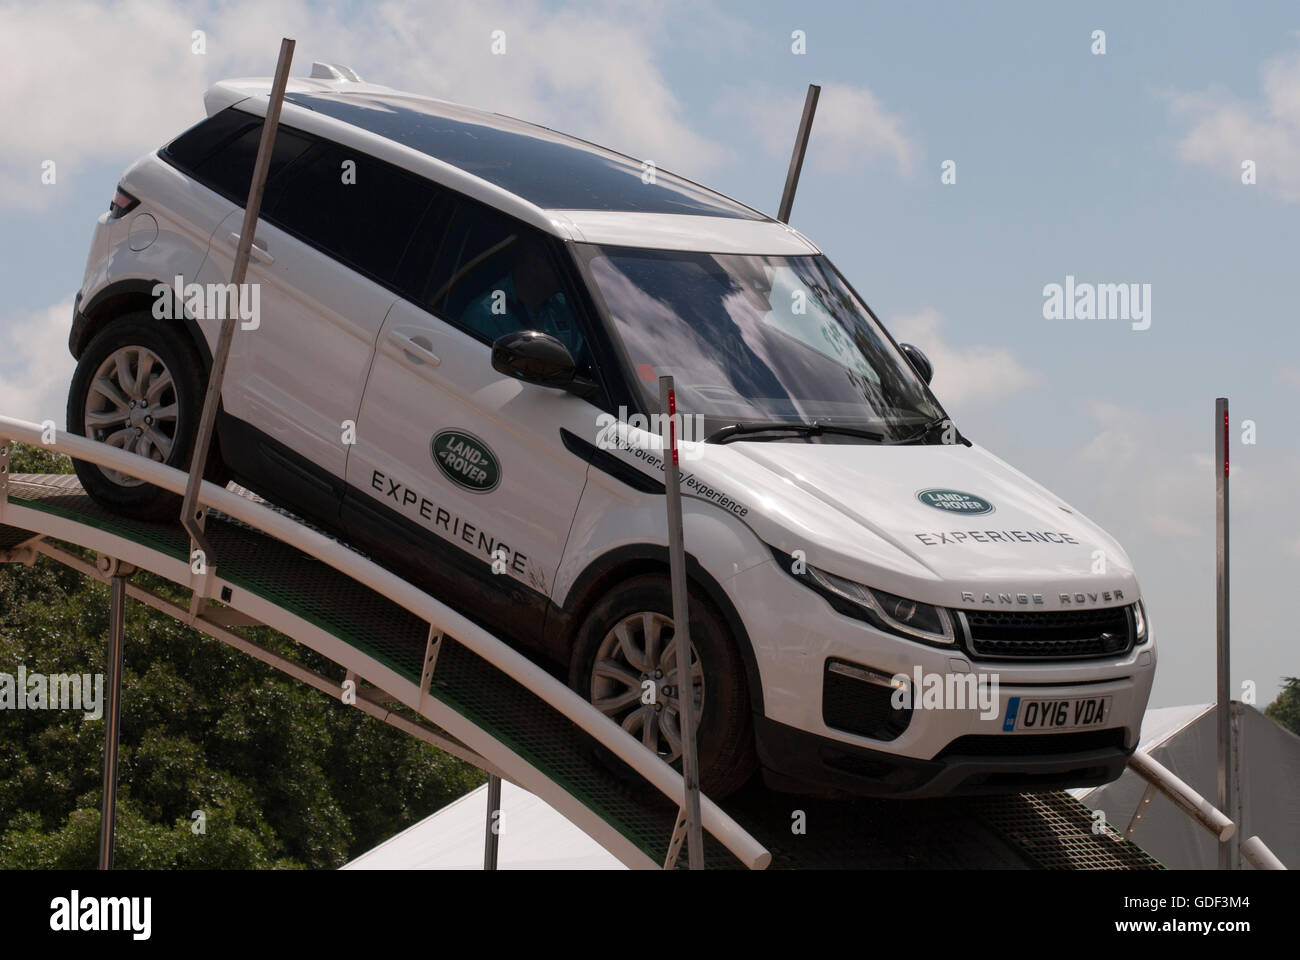 Range Rover taking part in Land Rover Experience at the 2016 Goodwood Festival of Speed Stock Photo